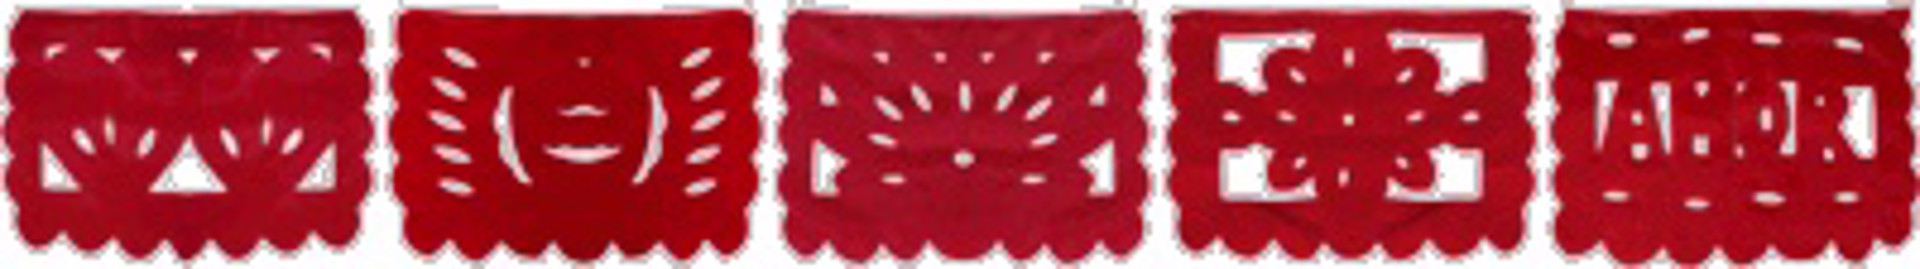 Papel Picado Banner - 36" Red Love Banner by Indigo Desert Ranch - Day of the Dead